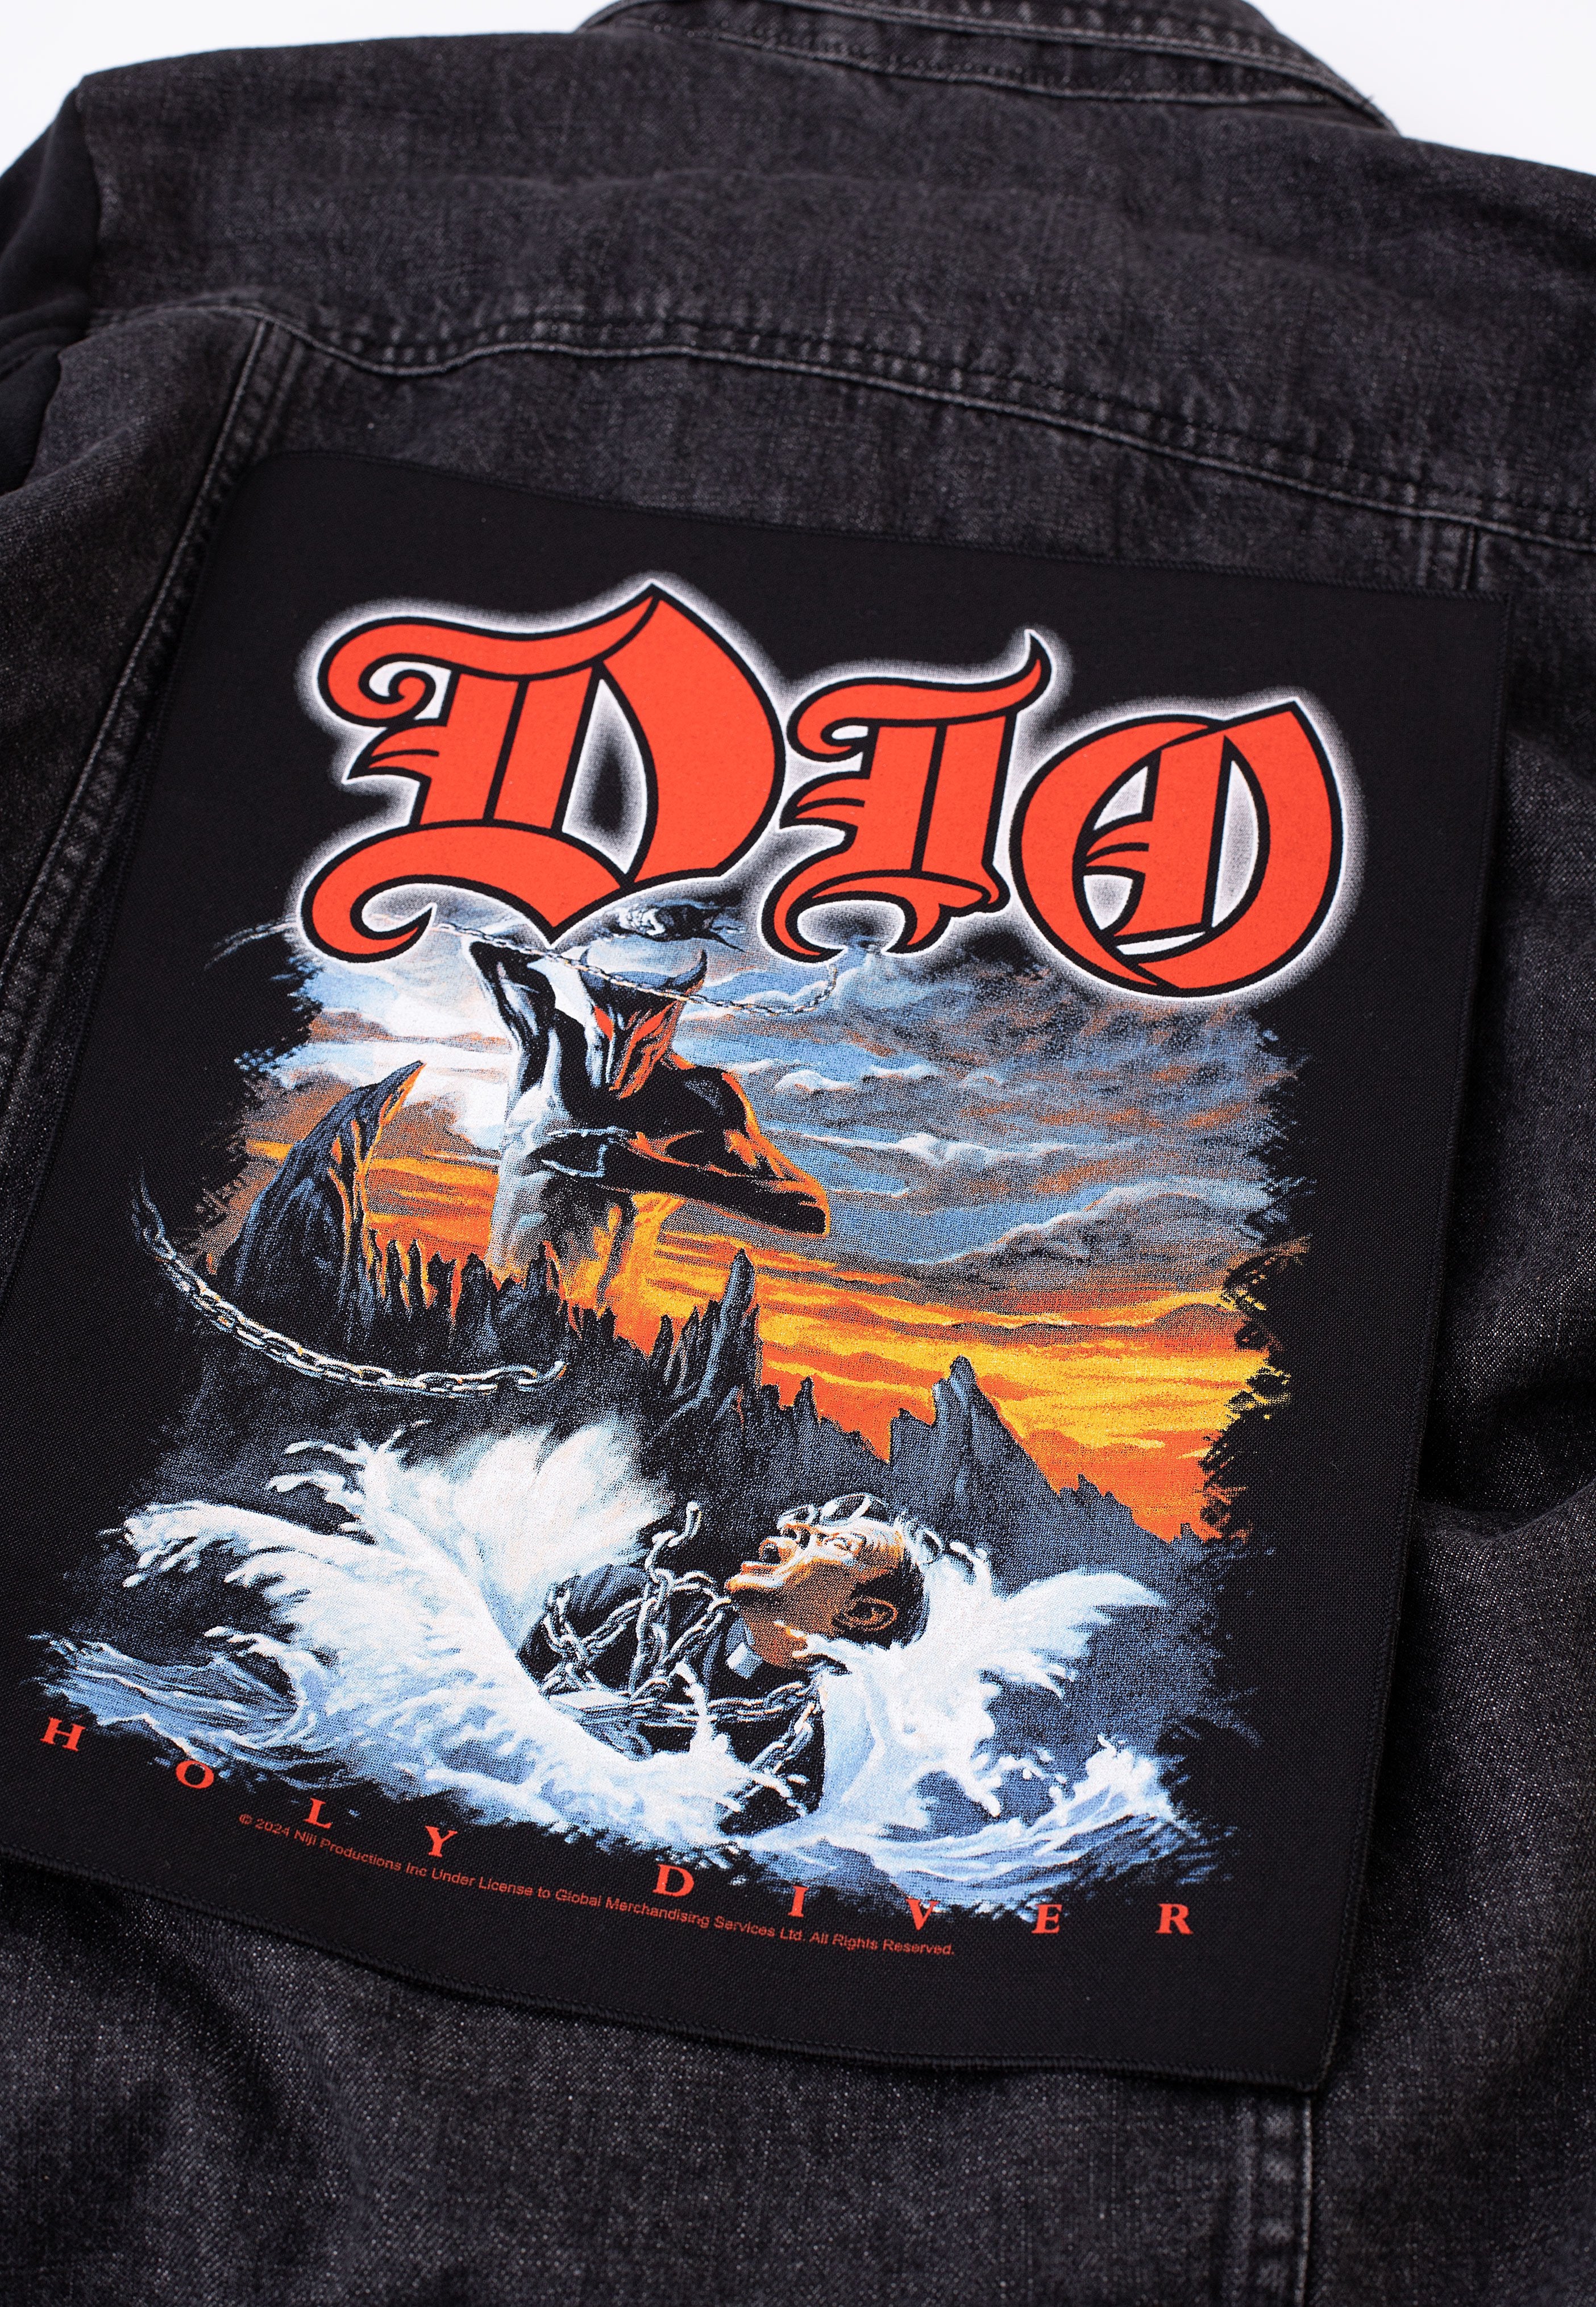 Dio - Holy Diver - Backpatch